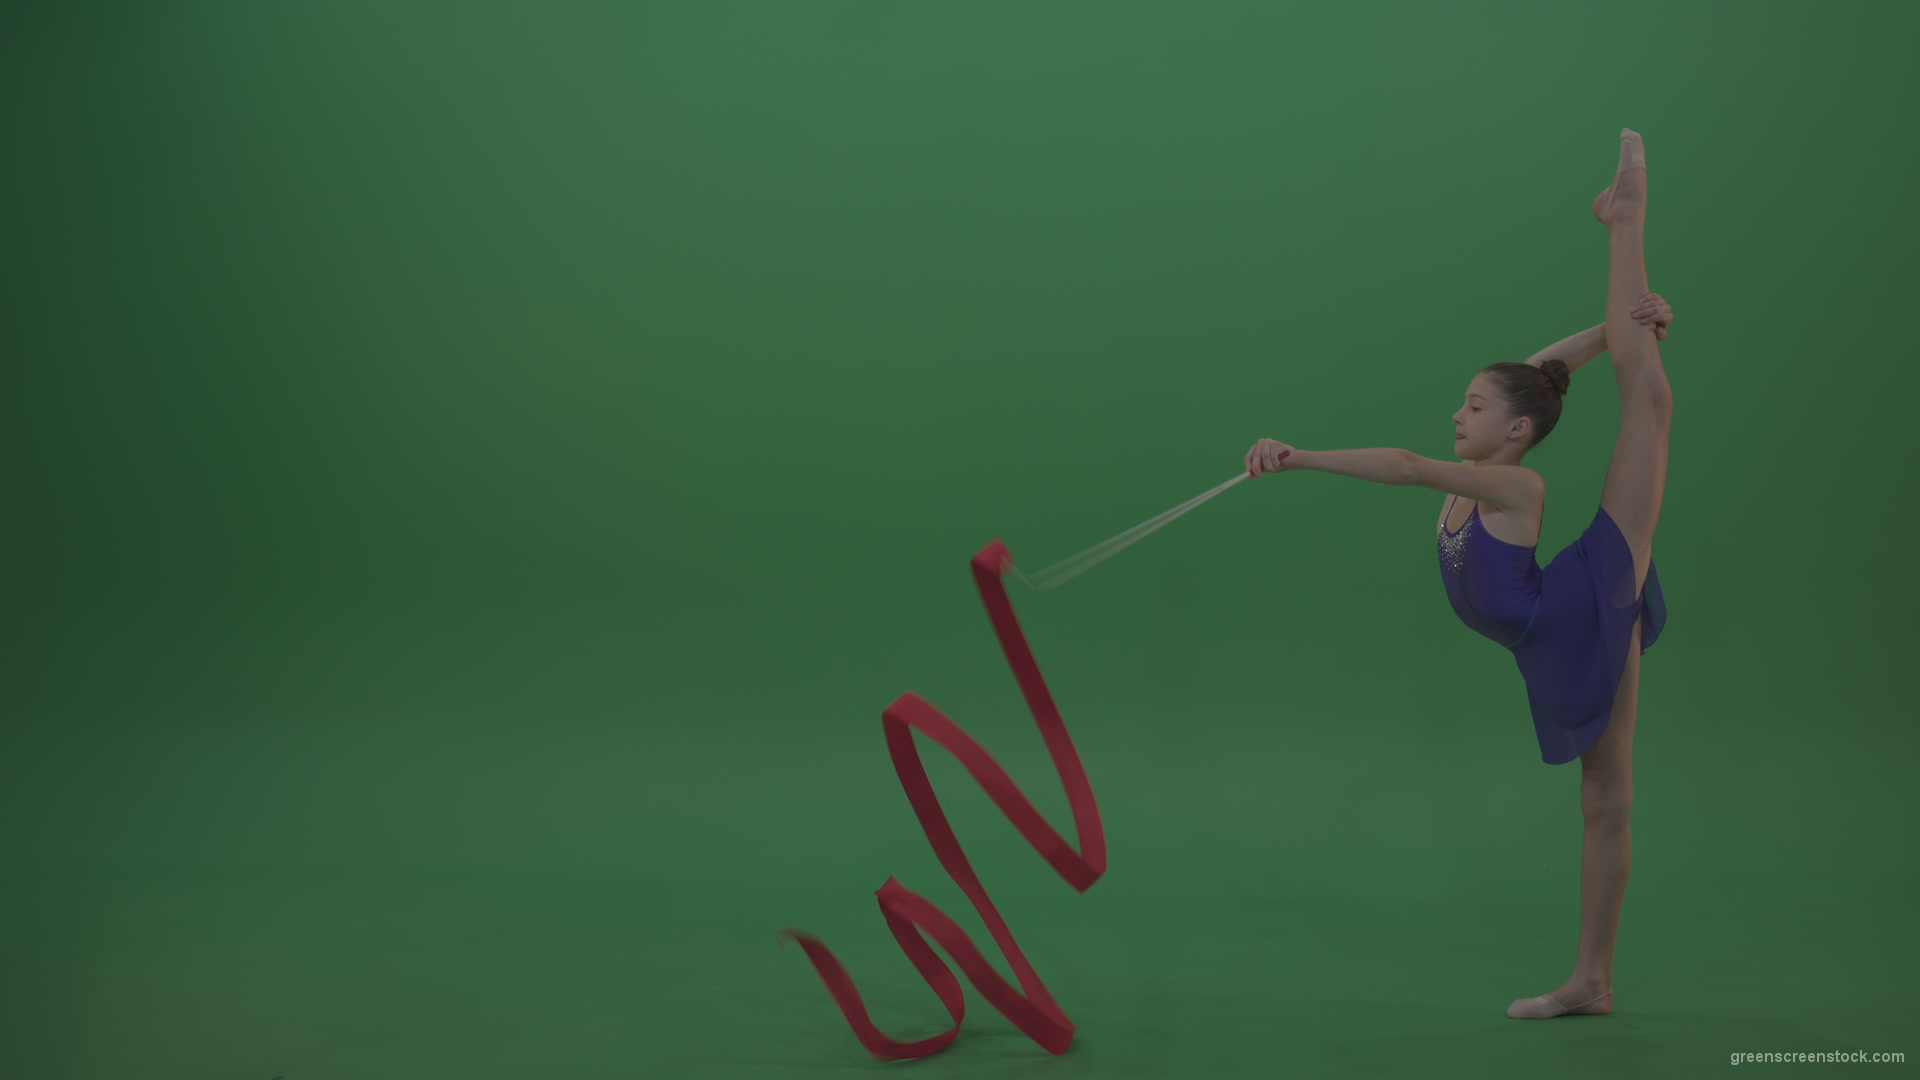 Young_Brunette_Gymnast_Wearing_Blue_Sparkling_Costume_Performing_Some_Acro_Dance_Moves_And_Positions_Using_Ribbon_On_Green_Screen_Chroma_Key_Wall_Background_004 Green Screen Stock